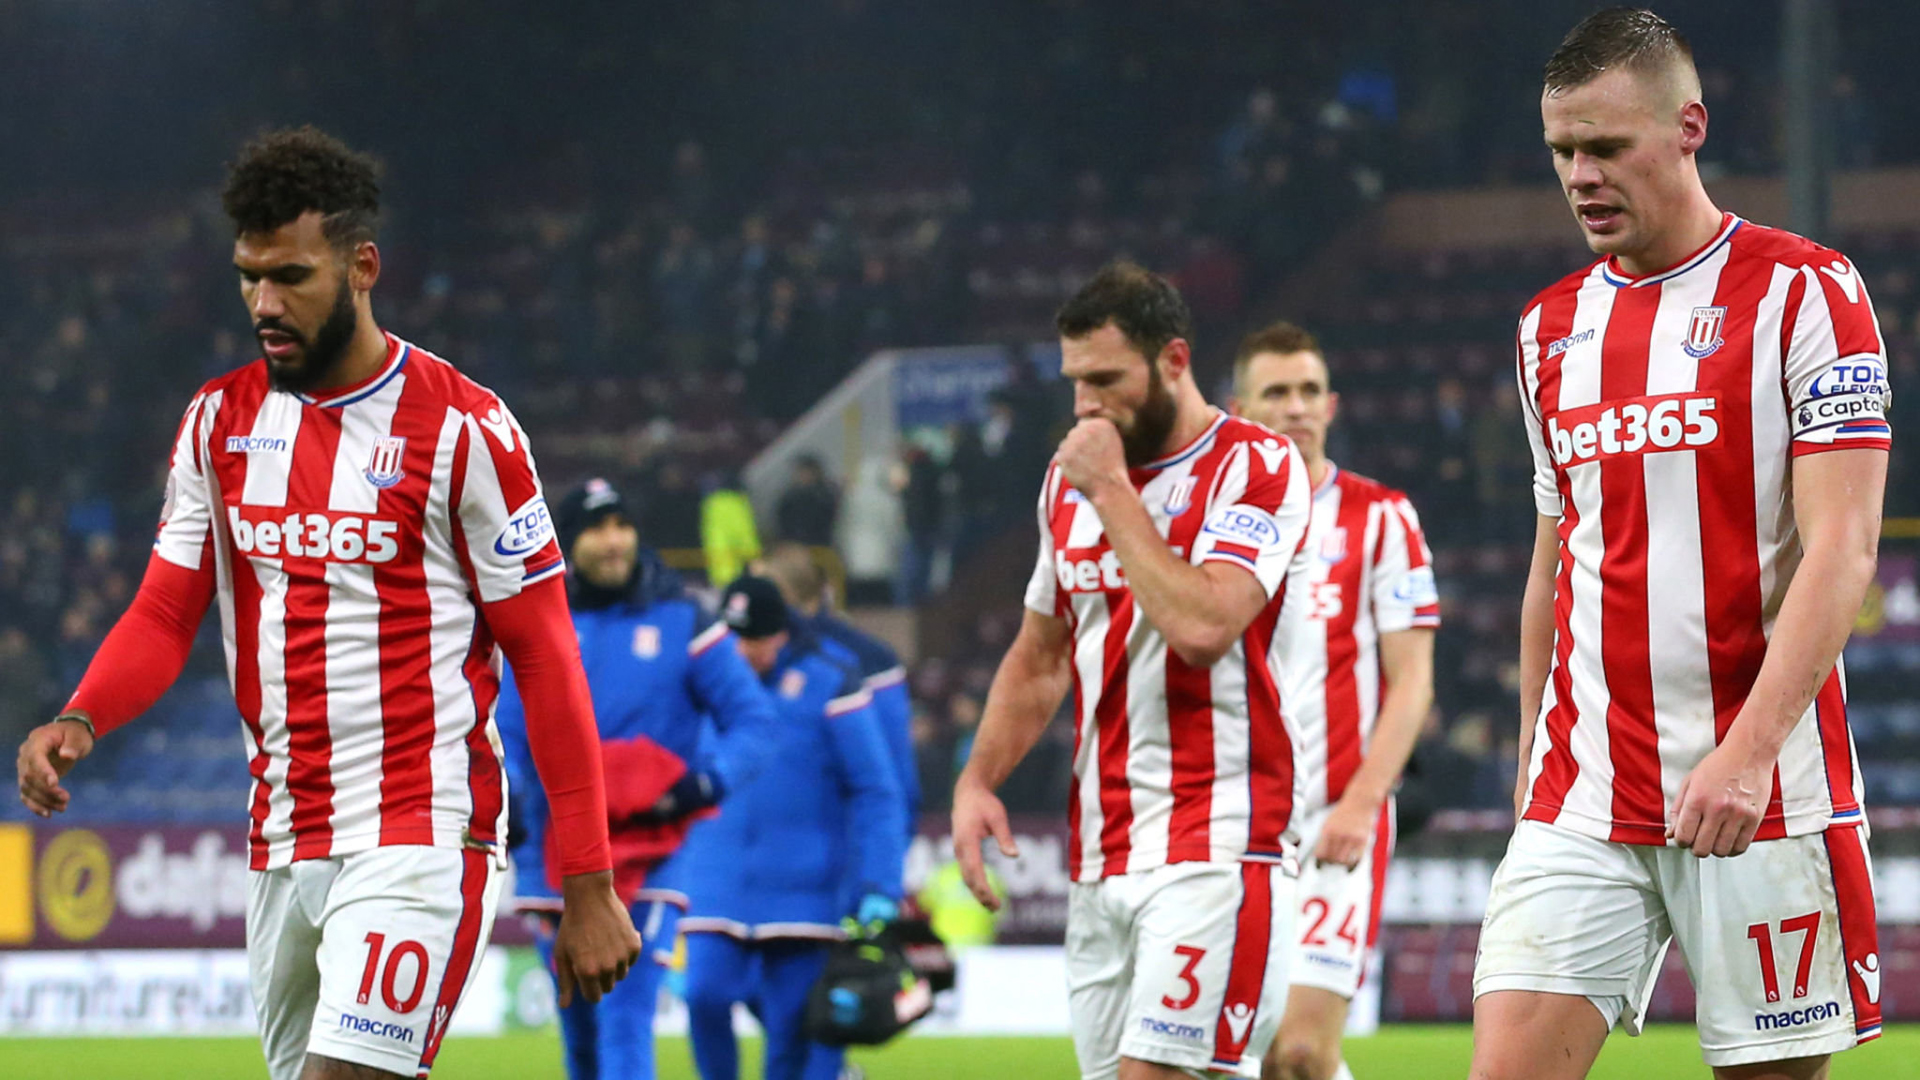 Patrick van Aanholt's goal denied Stoke a draw that would have kept alive their survival hopes until at least later on Saturday